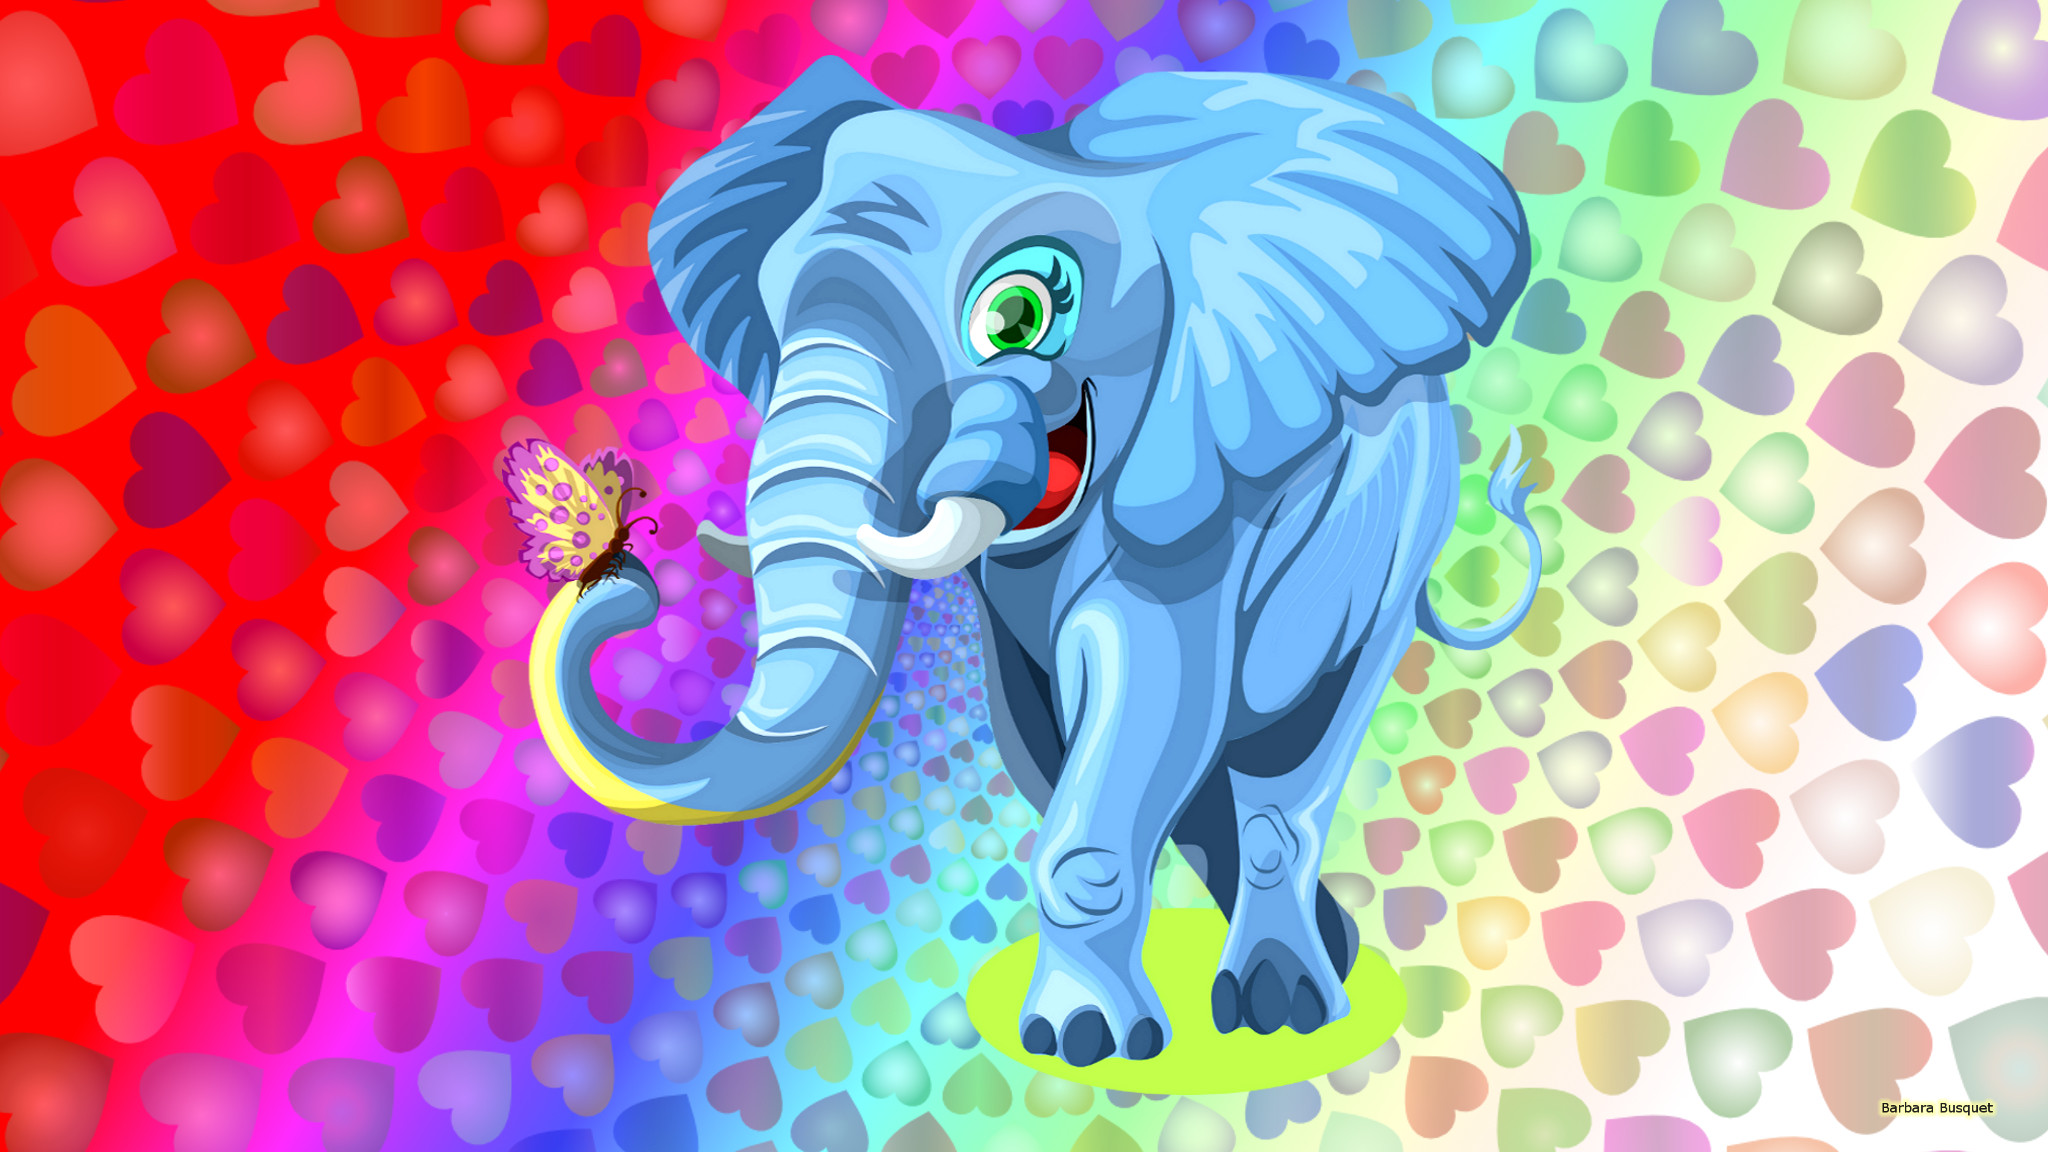 Colorful Wallpaper With Elephant And Hearts - Colorful Elephant , HD Wallpaper & Backgrounds